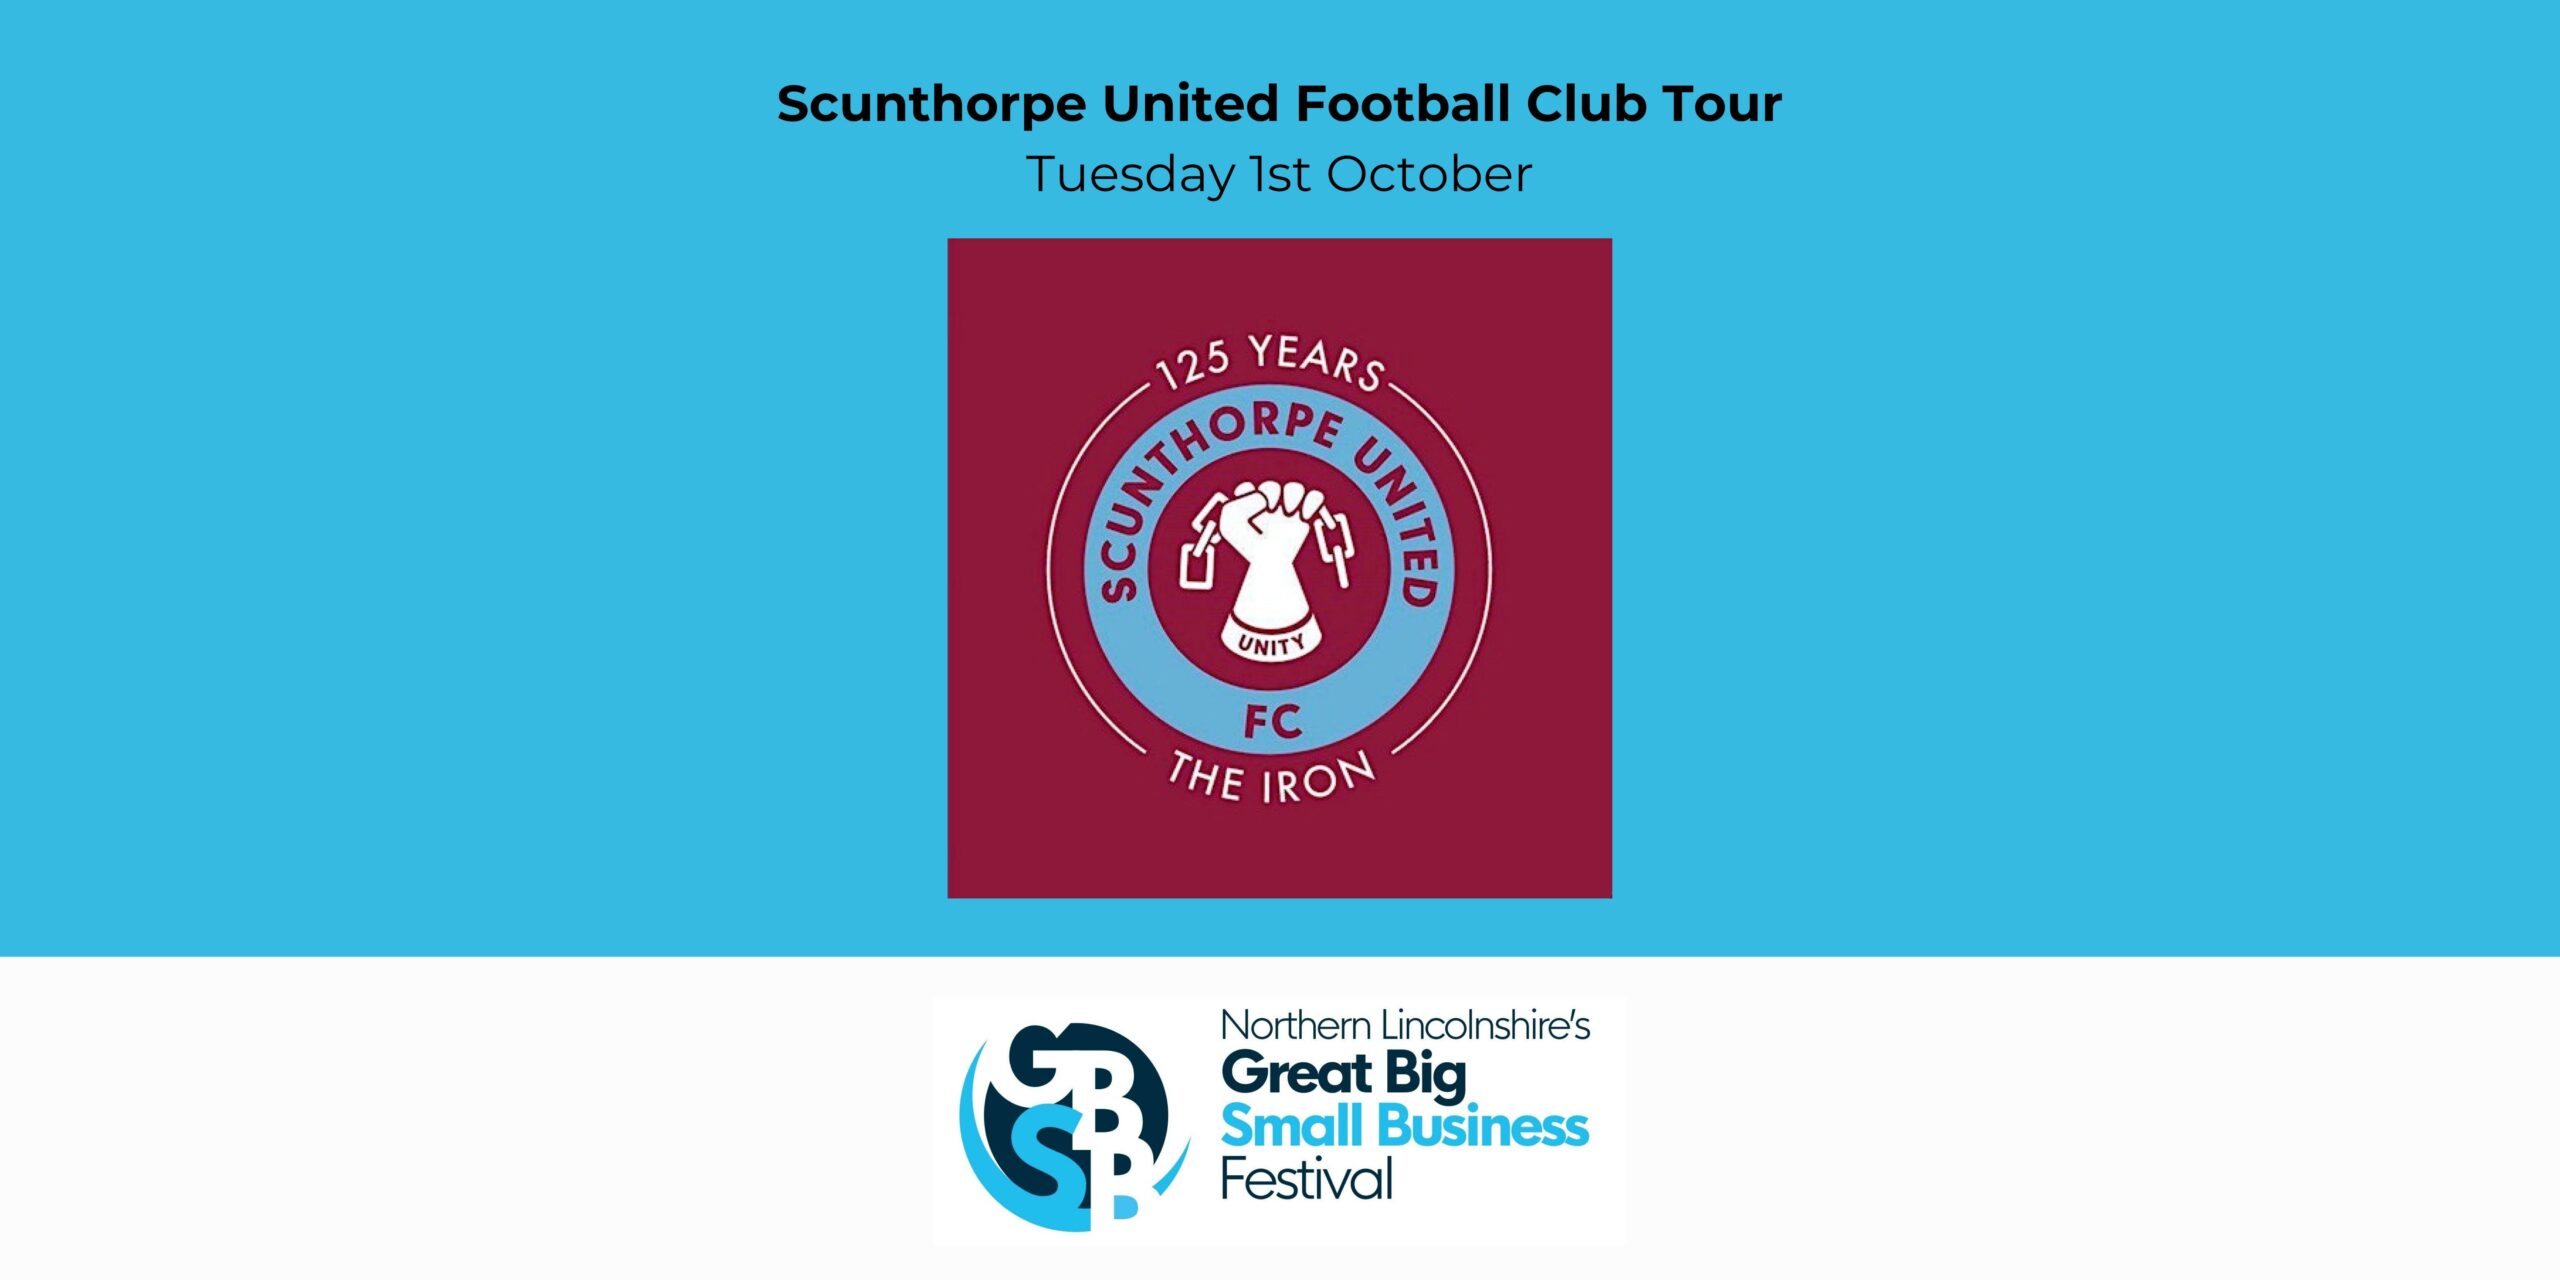         Promotional banner for Scunthorpe United Football Club Tour on Tuesday, 1st October, celebrating 125 years. Sponsored by Northern Lincolnshire's Great Big Small Business Festival (GBSB Festival).